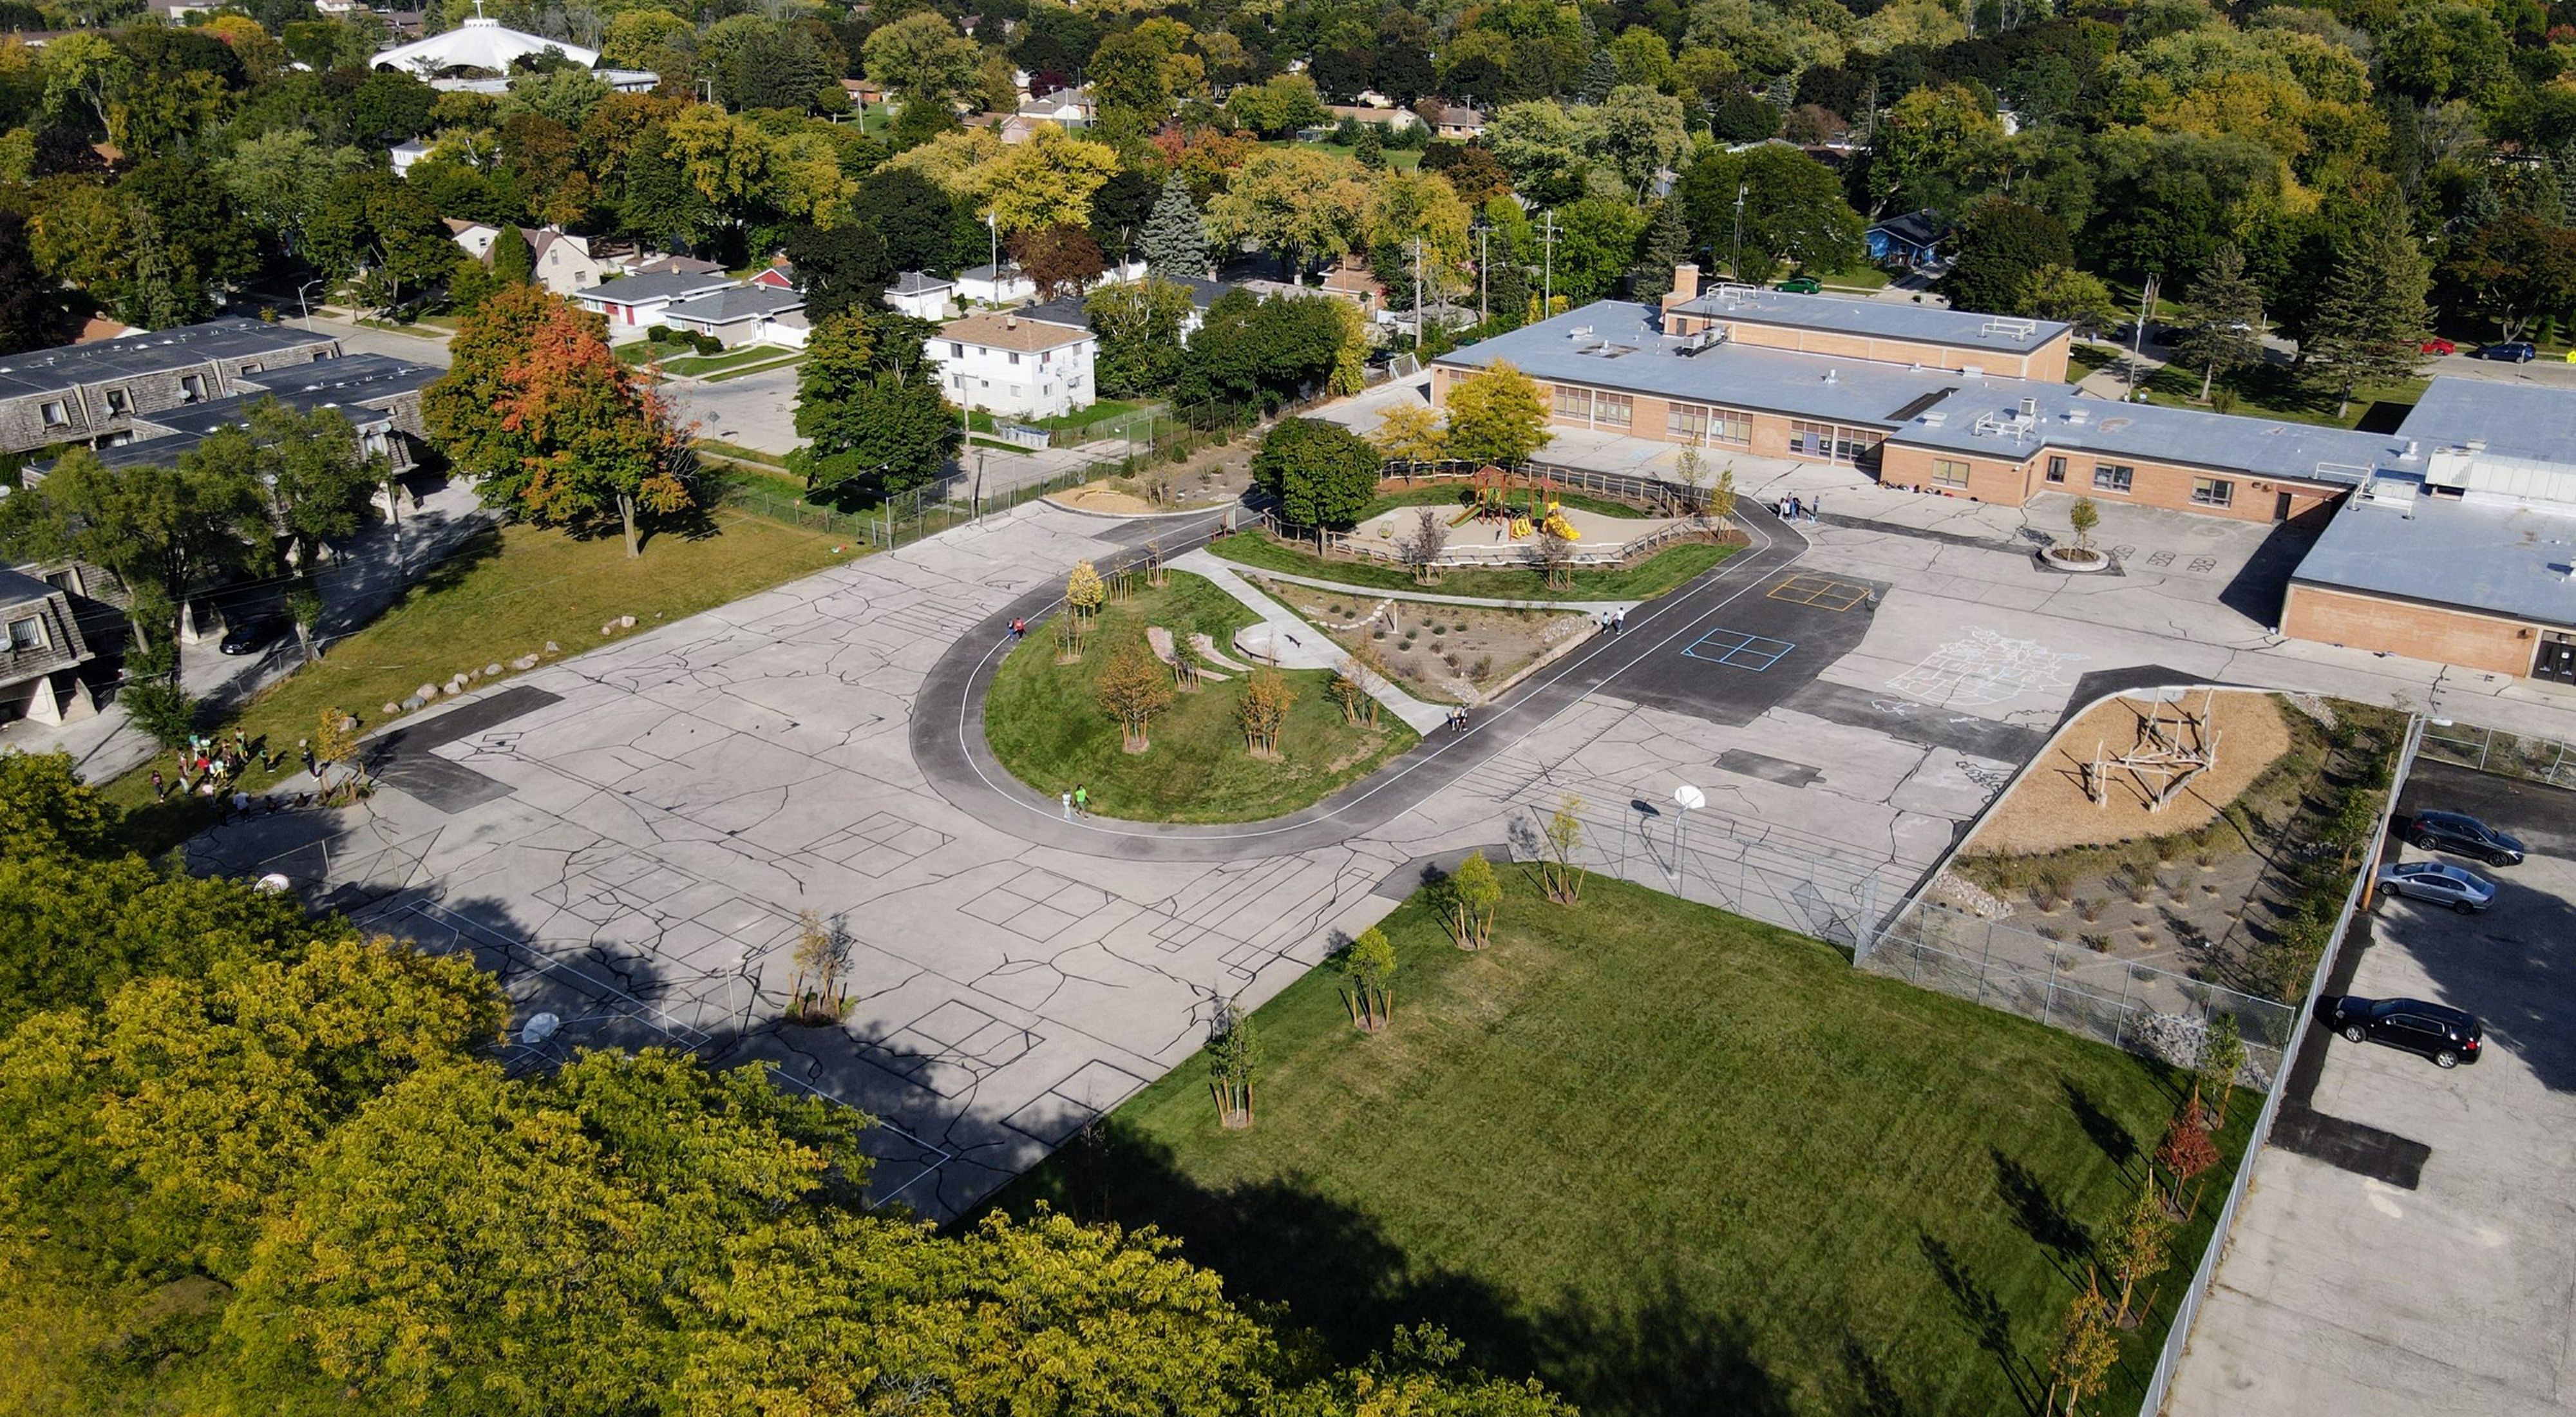 Aerial view of a schoolyard with grass and trees interspersed with playground equipment.